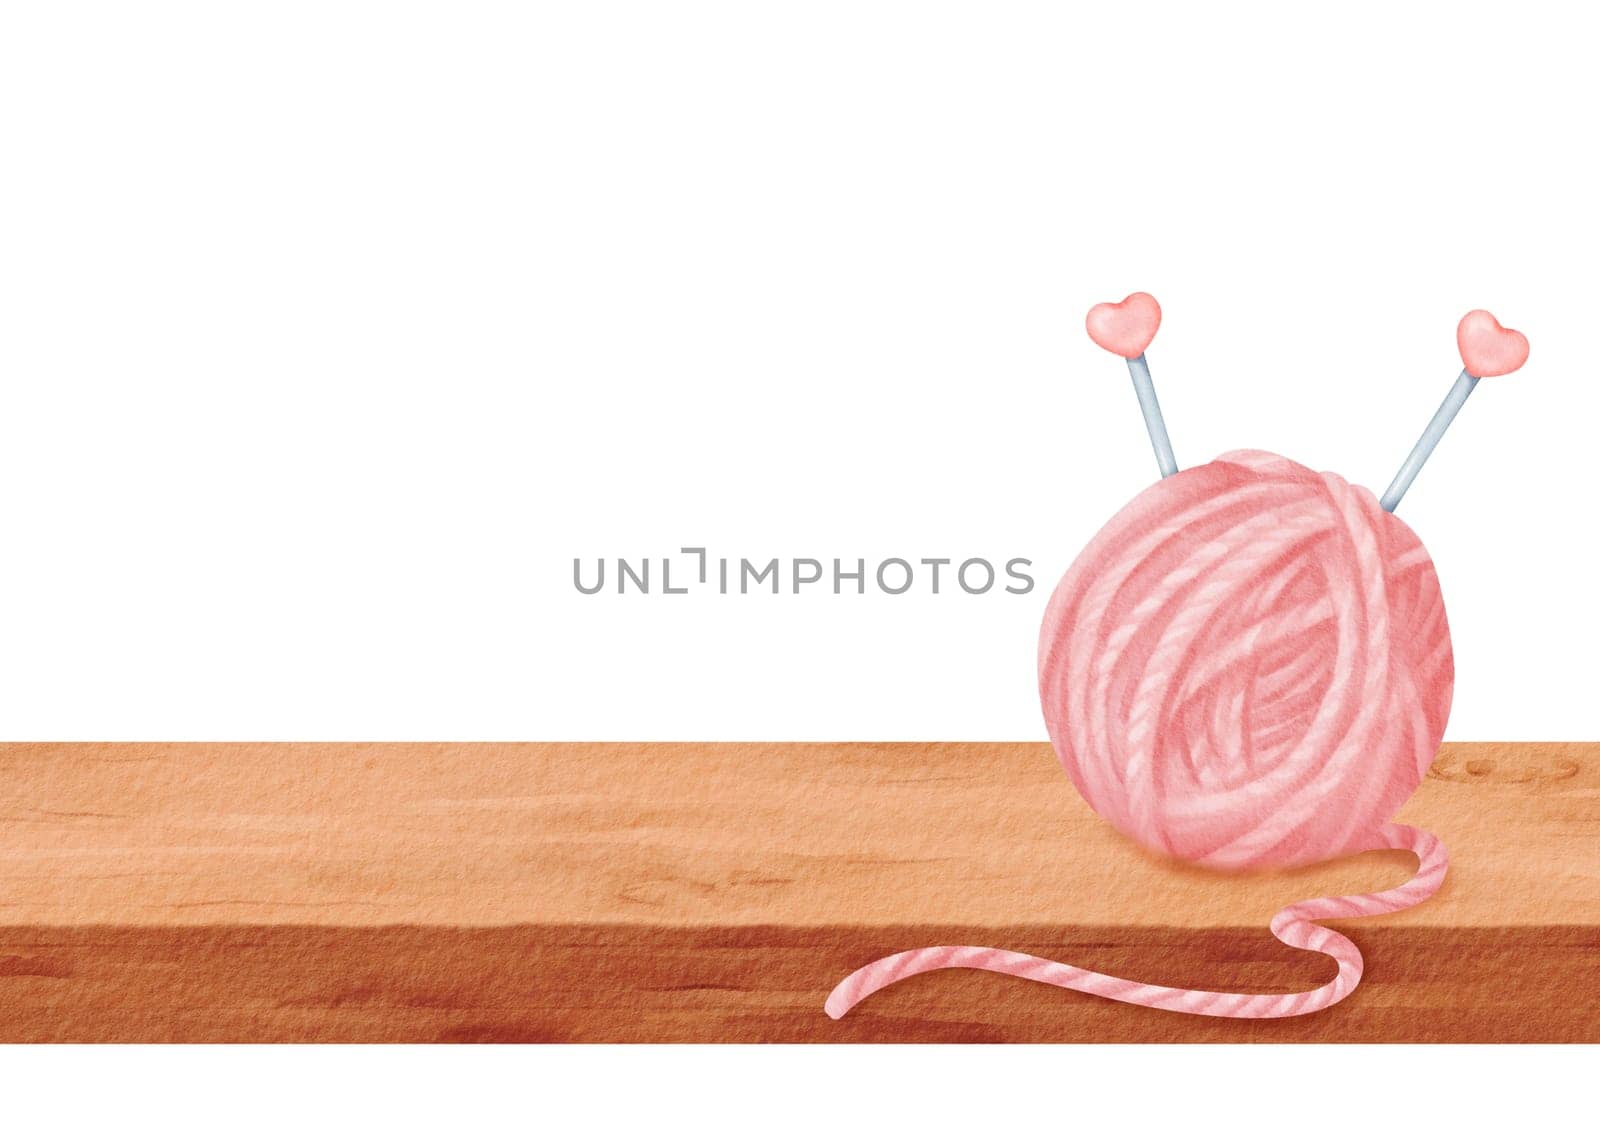 A composition featuring a pink yarn skein with knitting needles resting on a windowsill or wooden table. The needles with plastic heart charms. Plenty of space for text. Watercolor illustration.